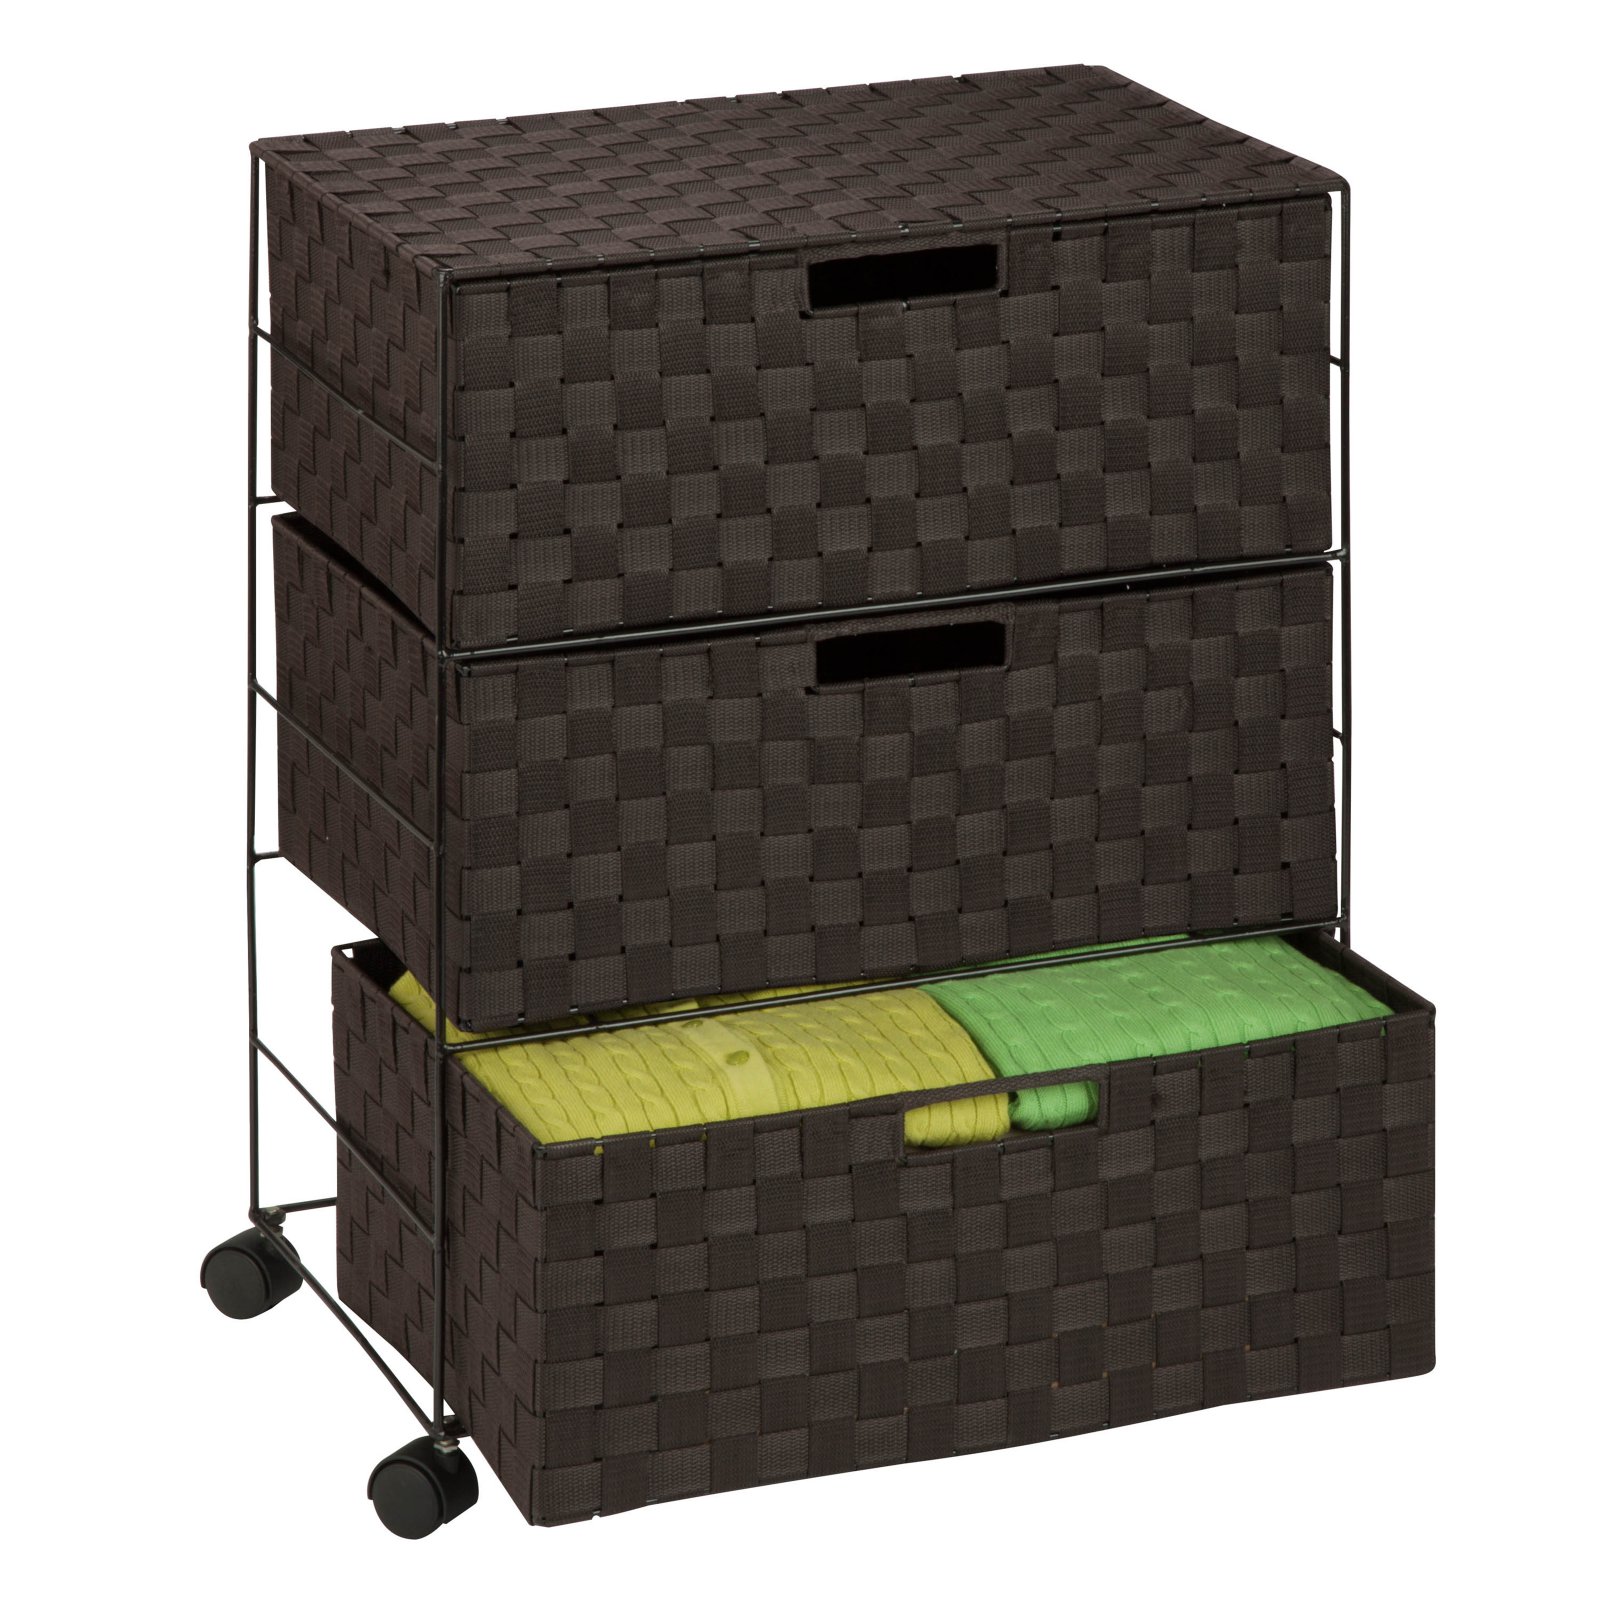 Honey-Can-Do Steel and Fabric Woven 3-Drawer Rolling Chest, Brown - image 2 of 2